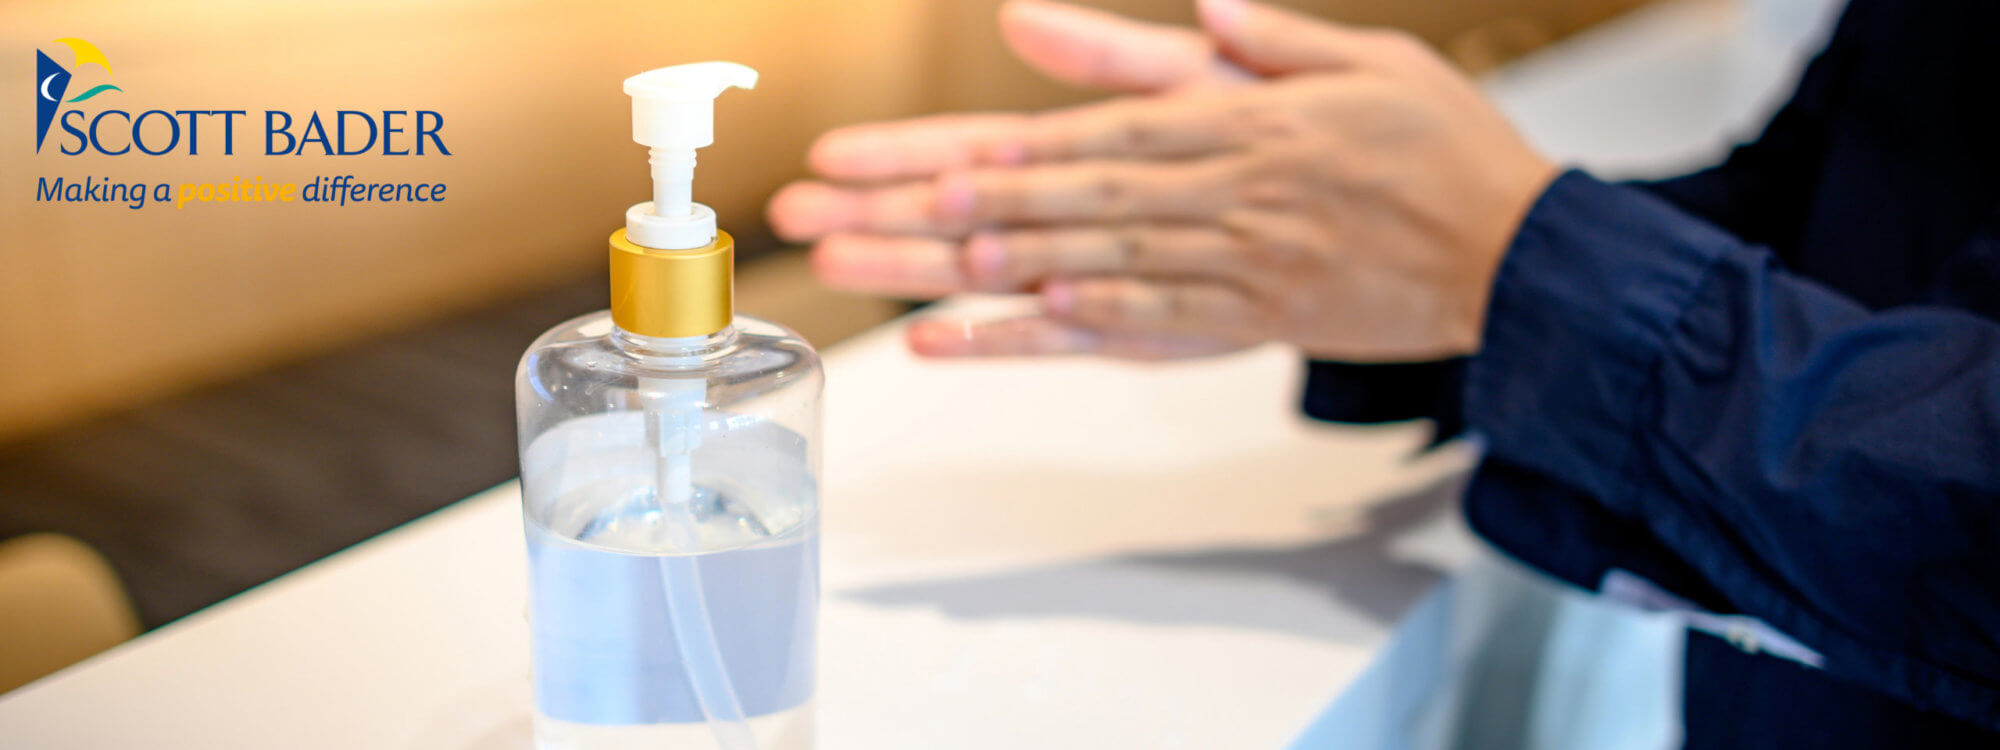 Scott Bader launches new thickener for alcohol-based hand cleansers to help global effort